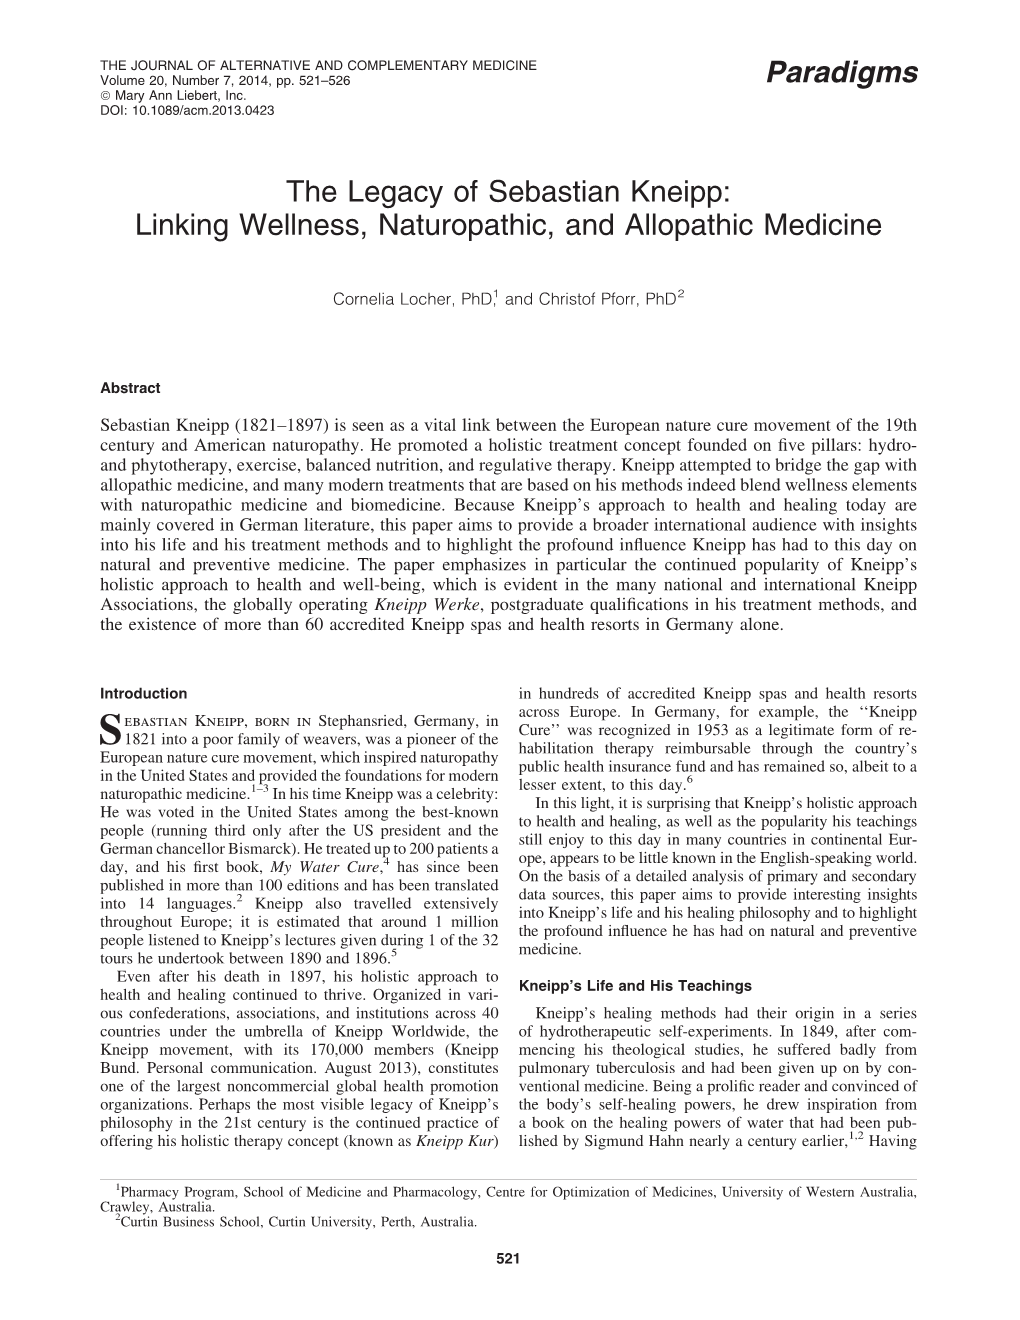 The Legacy of Sebastian Kneipp: Linking Wellness, Naturopathic, and Allopathic Medicine